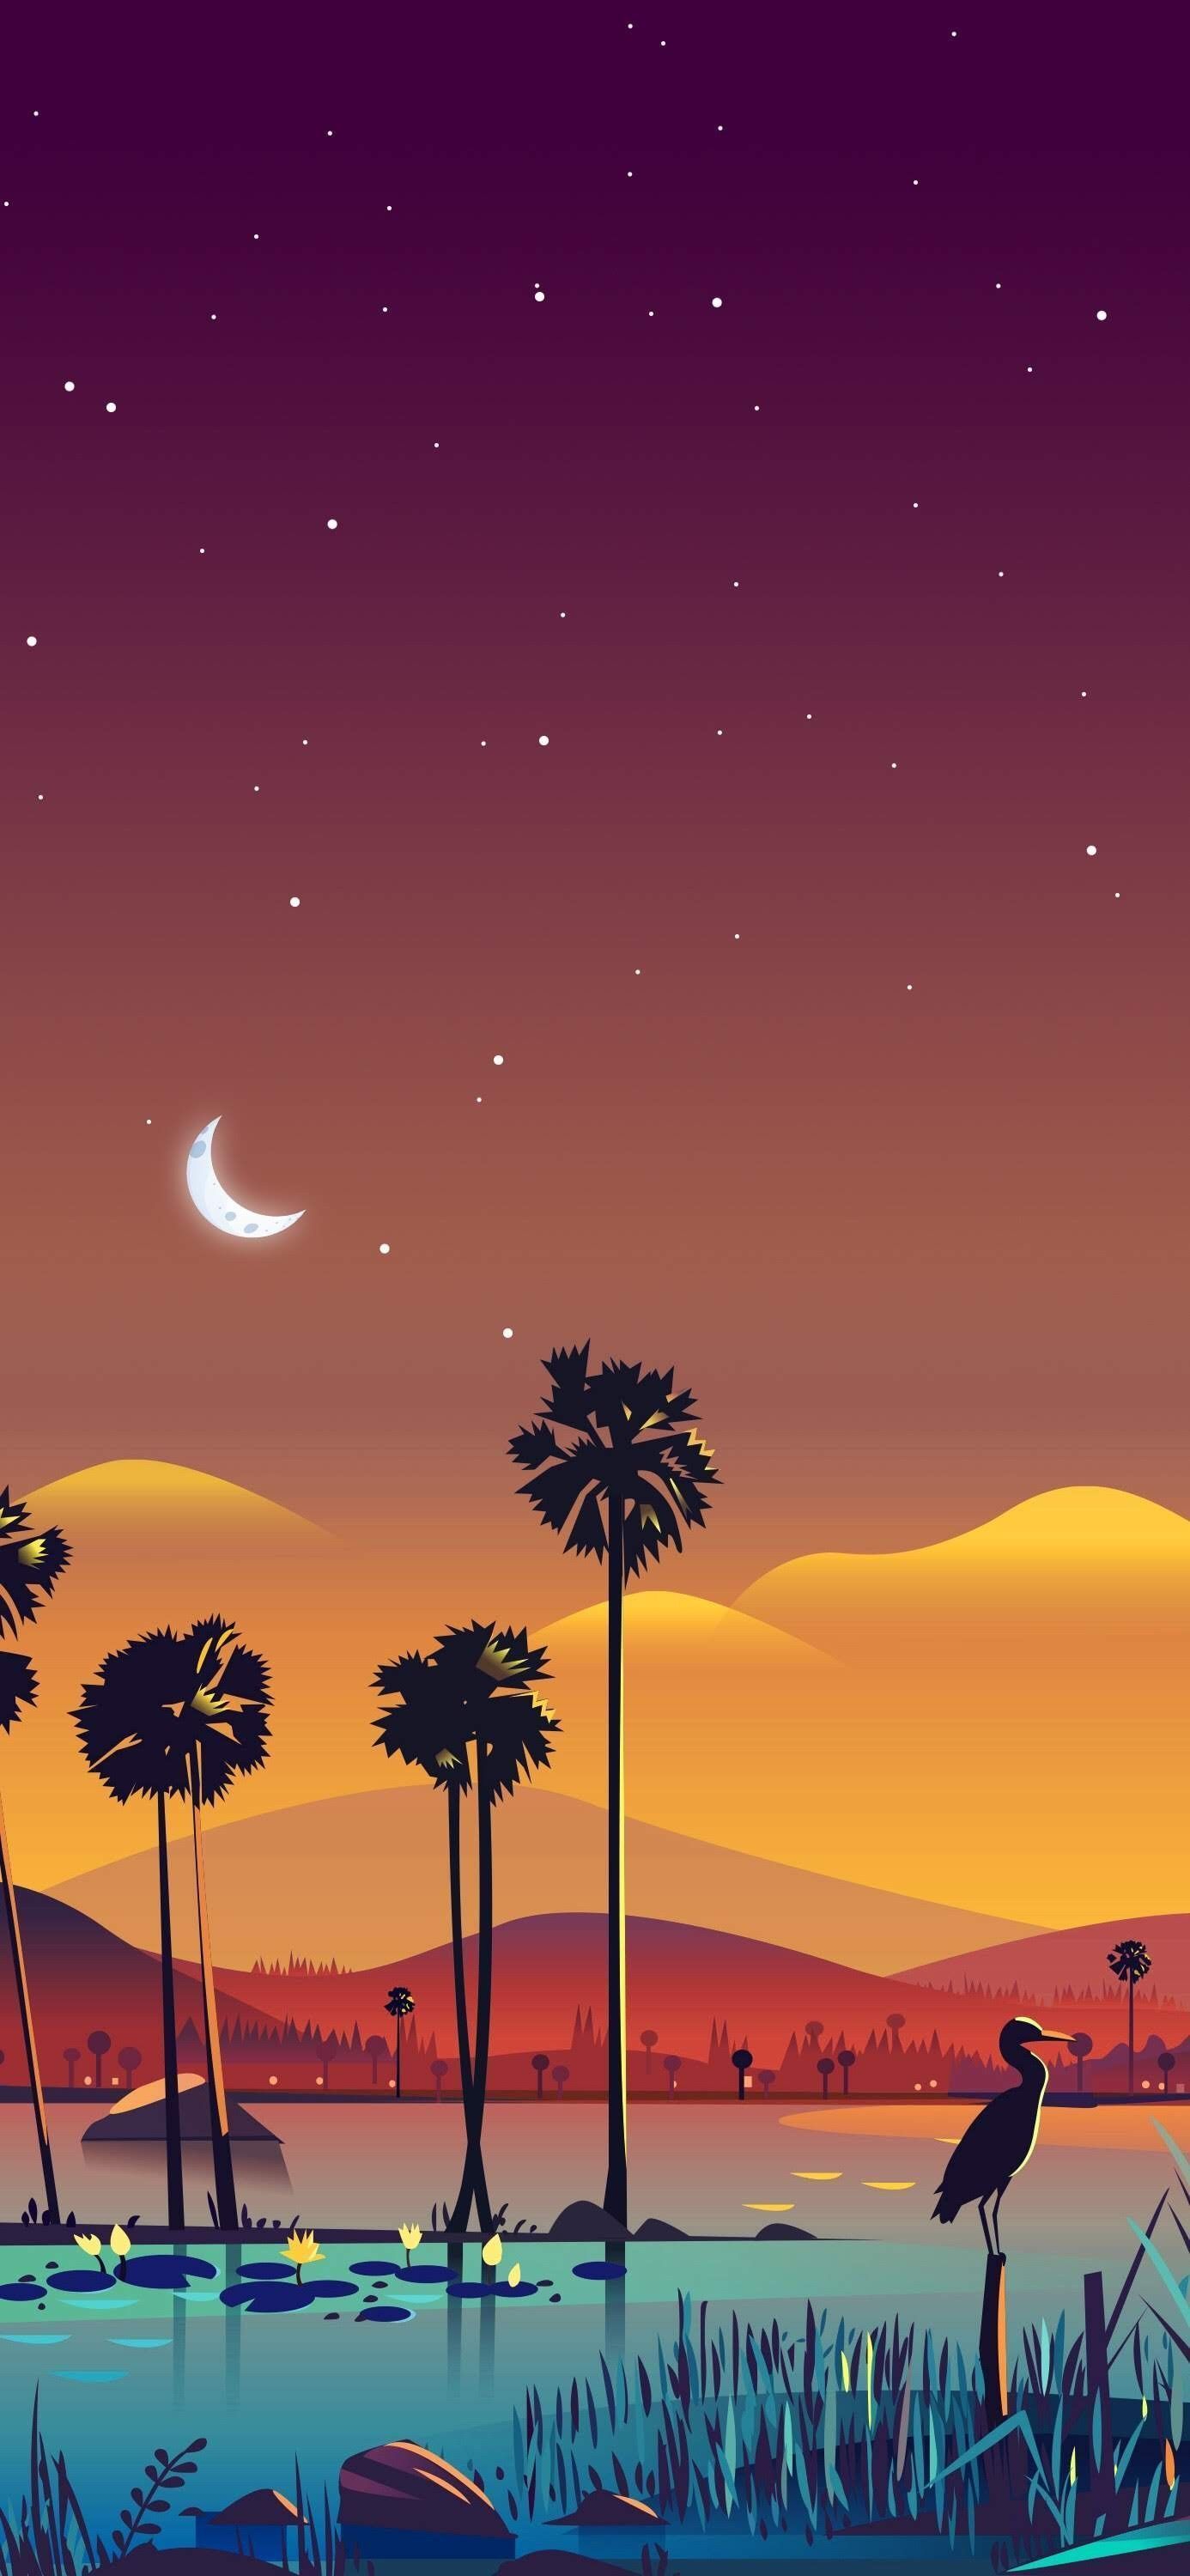 Night scenery with palm trees and a bird in the water - Desert